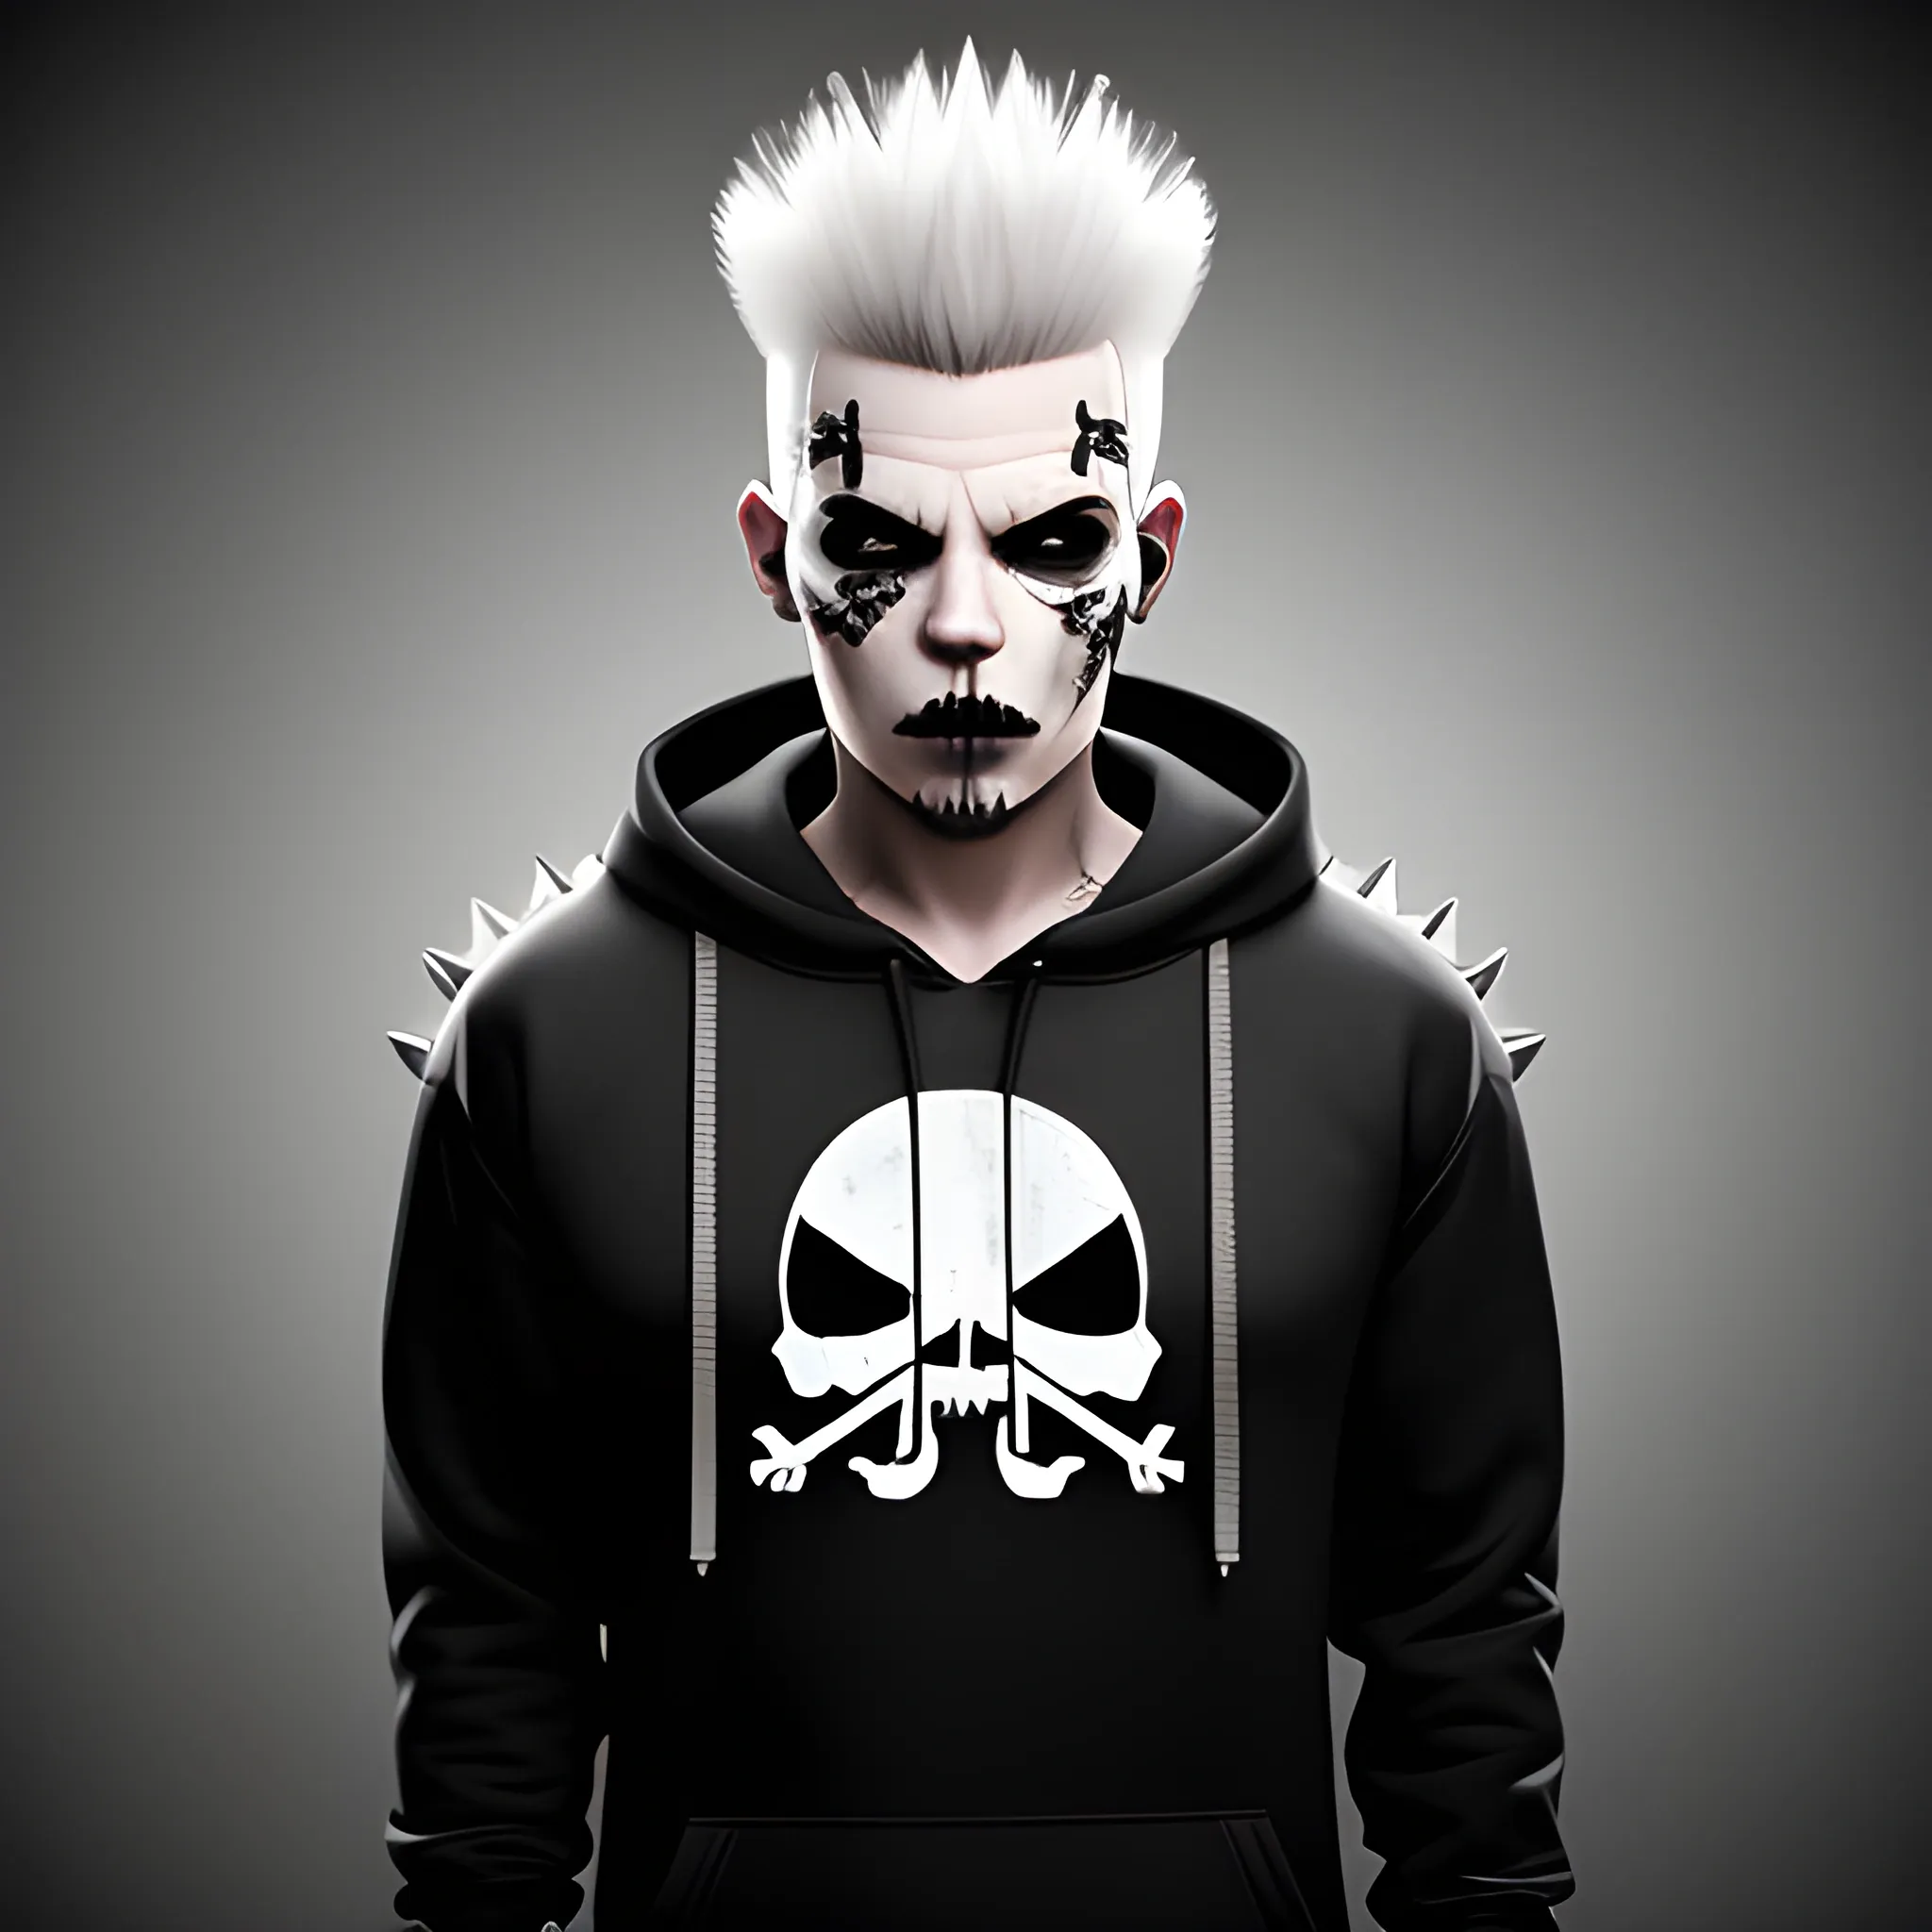 Photorealistic image White Punk Character facing front, full body, dimmed lighting, Spikey Head, bokeh lighting, Black Hoodie With Crossbones